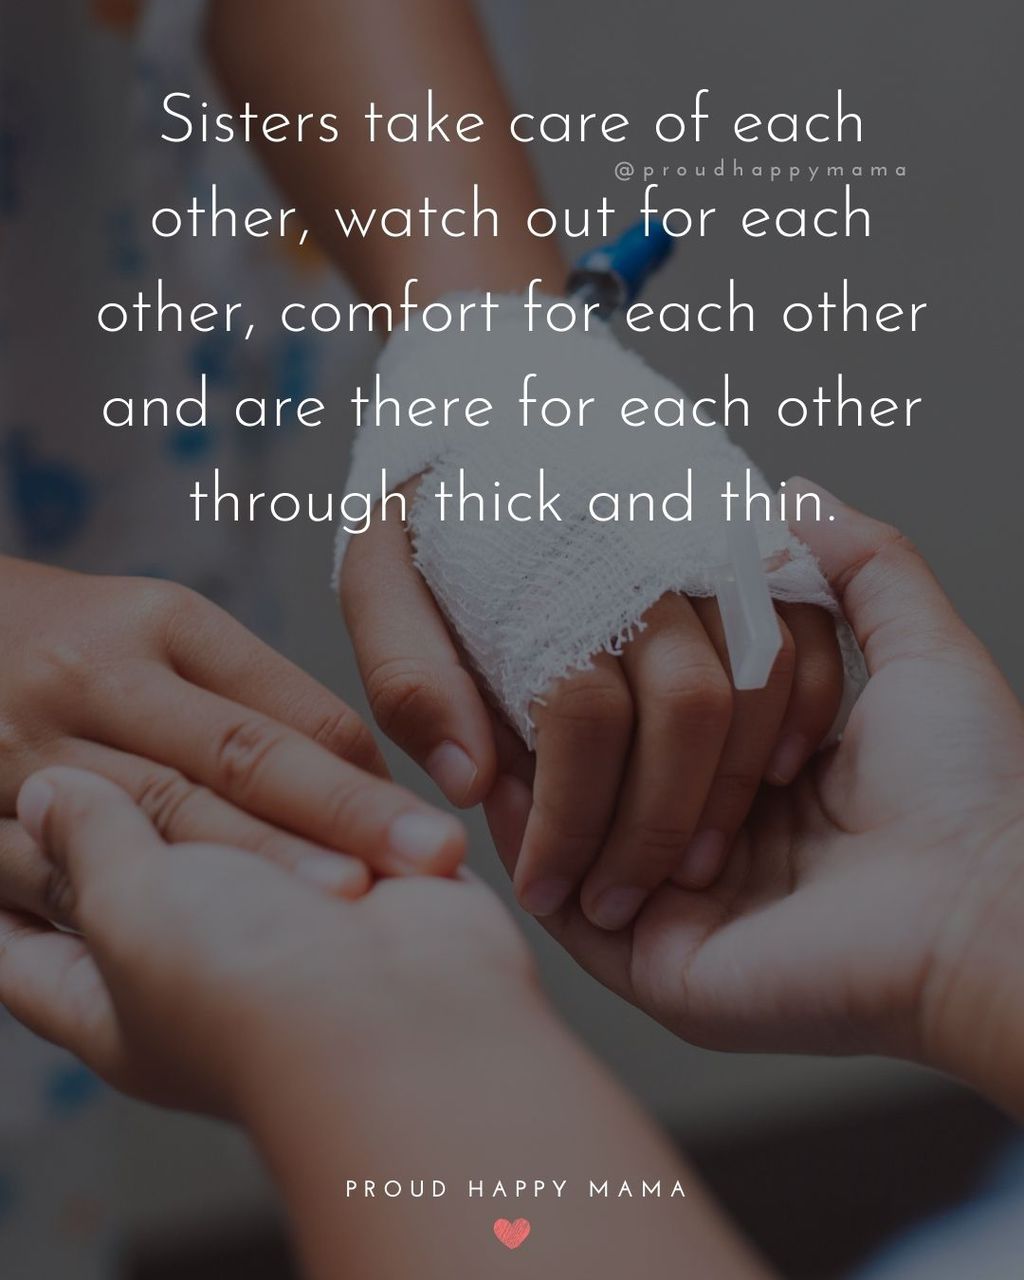 Sister Quotes - Sisters take care of each other, watch out for each other, comfort for each other and are there for each other through thick and thin.